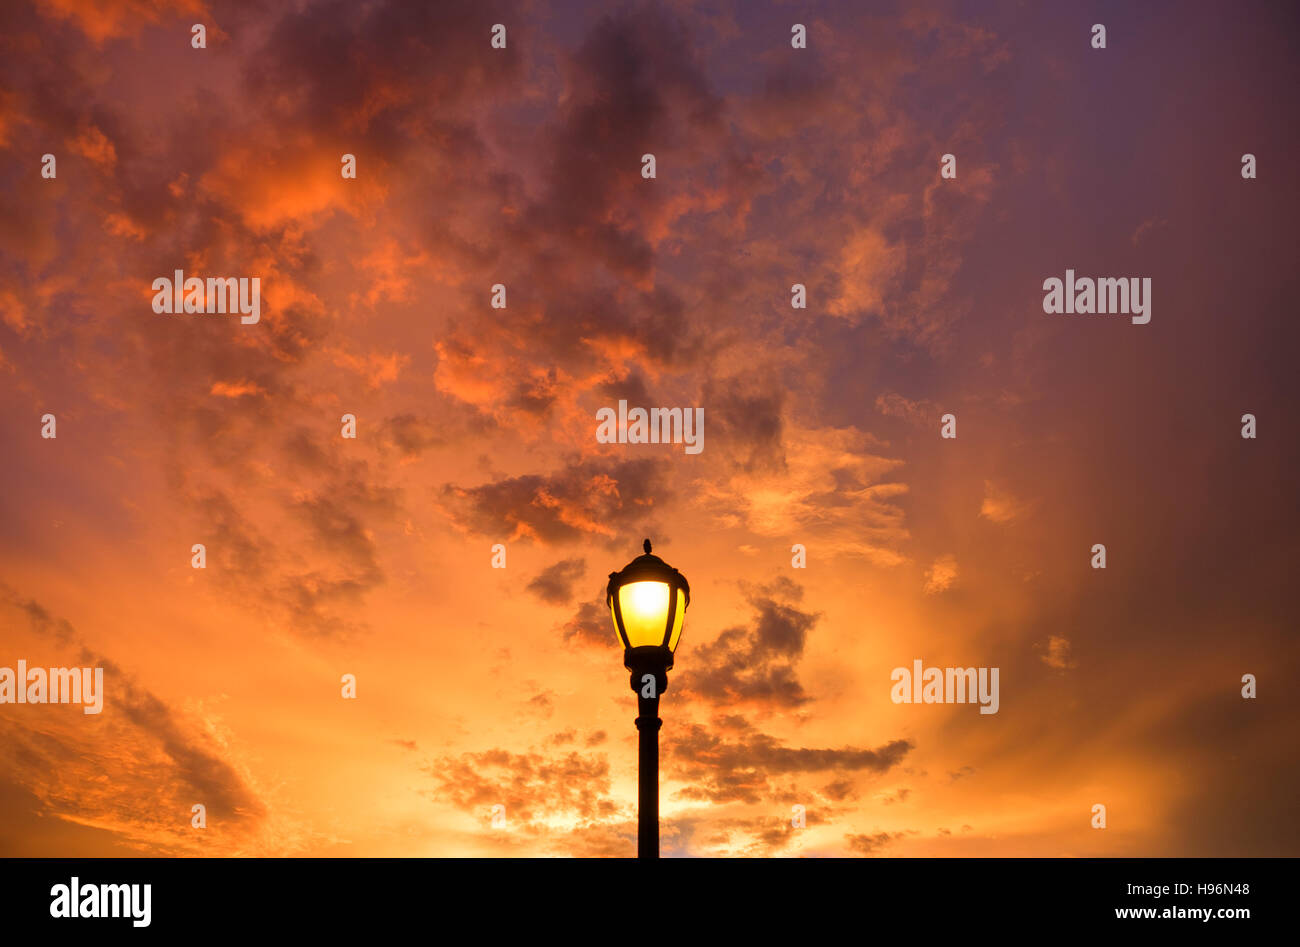 Dramatic sunset sky with lamp post in foreground Stock Photo